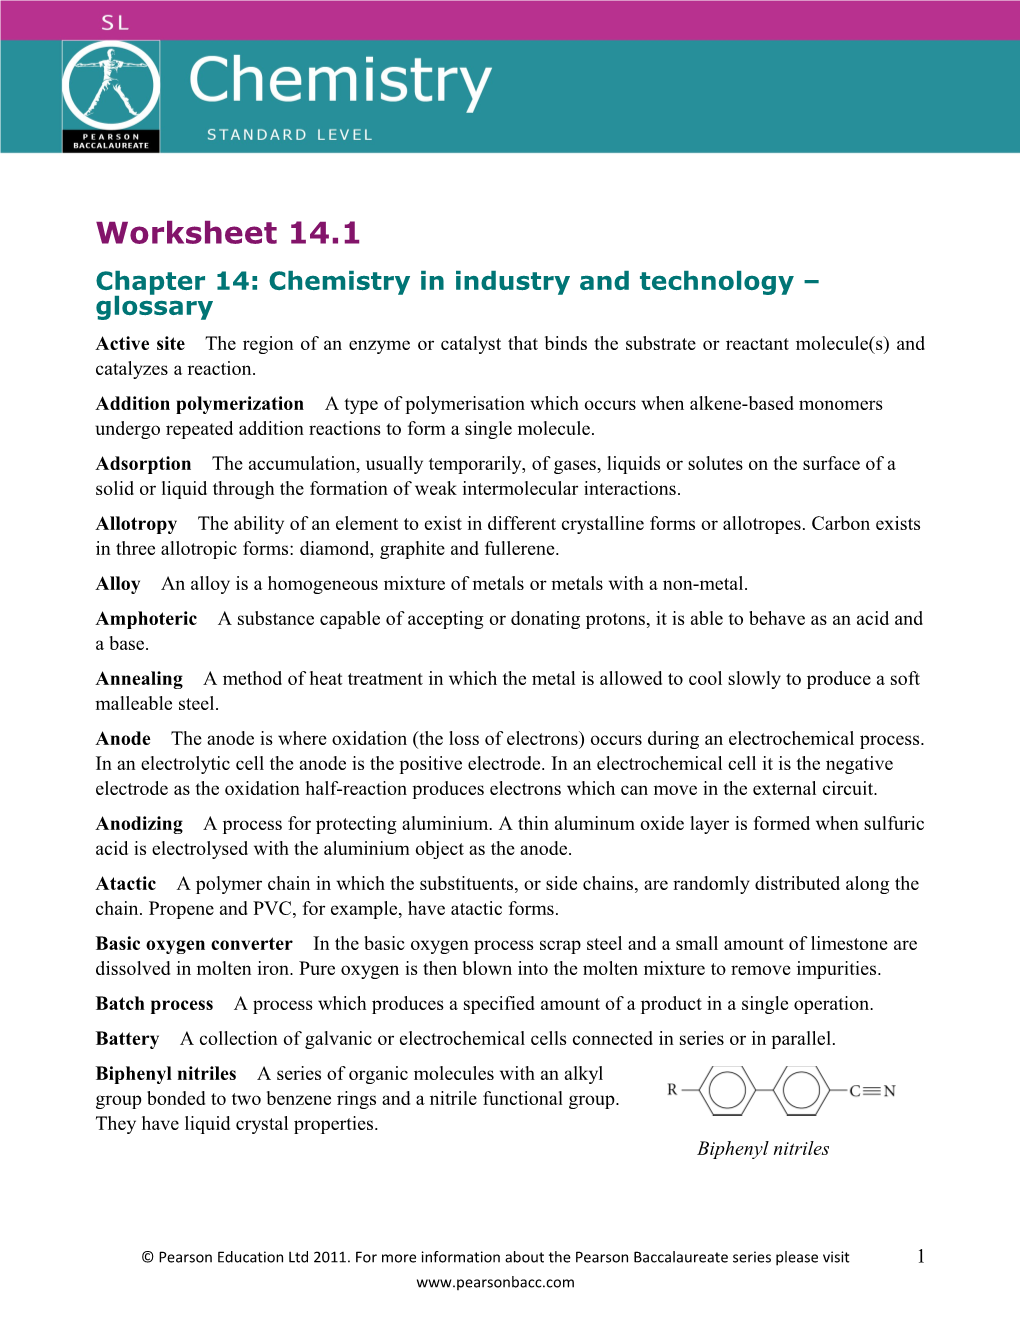 Chapter 14: Chemistry in Industry and Technology Glossary